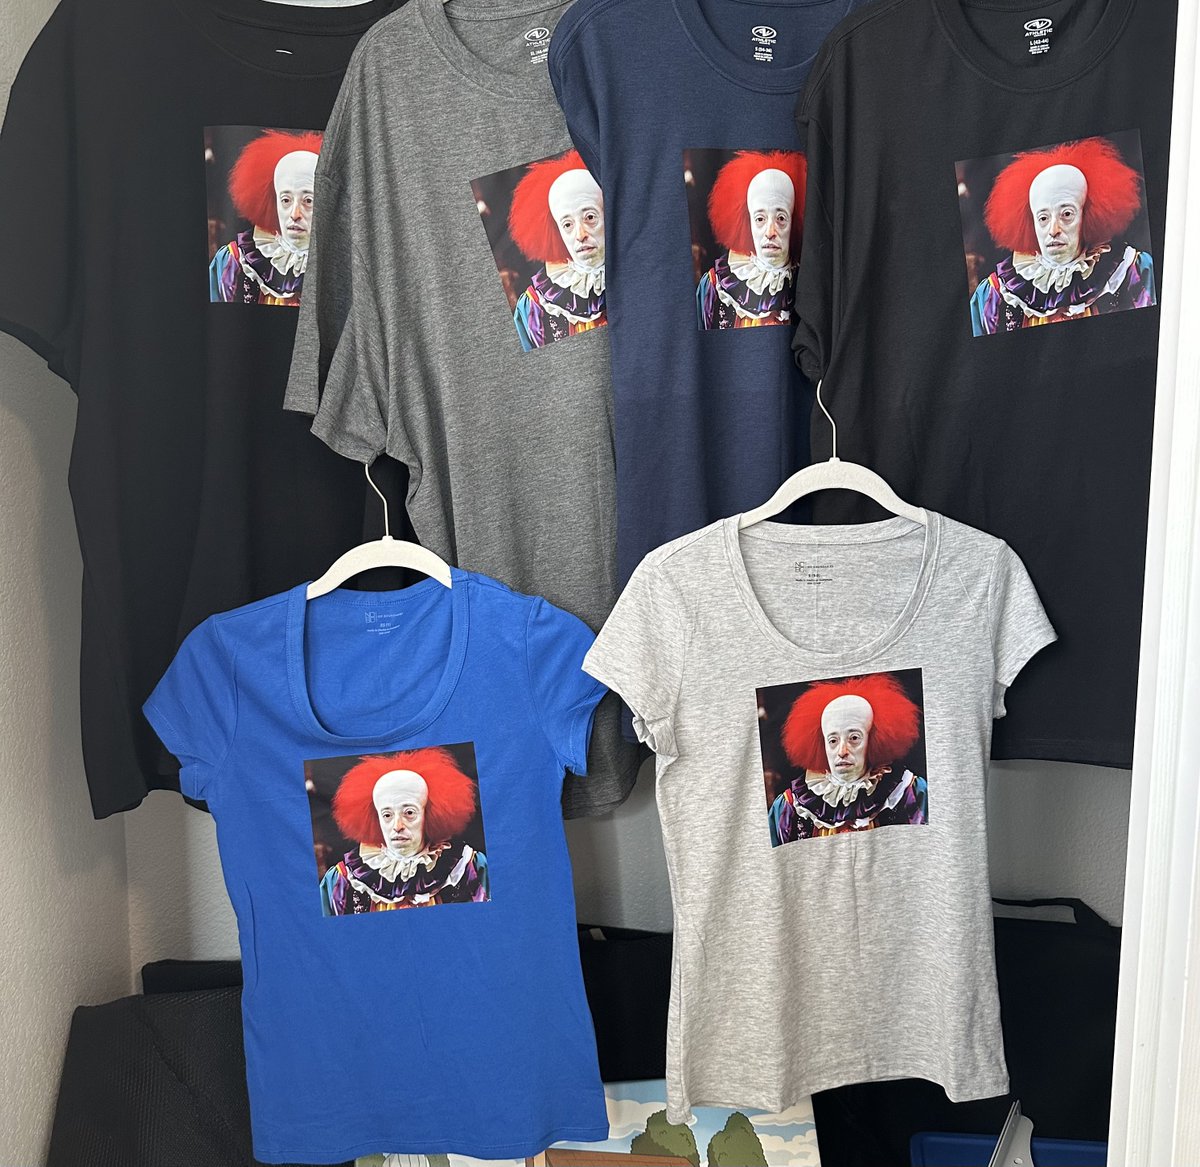 🧵 Since I have so many friends in town I had some shirts made of everyone’s favorite clown! DONATIONS ONLY, I’m going to donate 20% to @DeatonforSenate. I’ll be at the Avenue Cafe @MGMGrand 08:00-09:00 tomorrow. I’d love to meet anyone and everyone I can, whether you can…